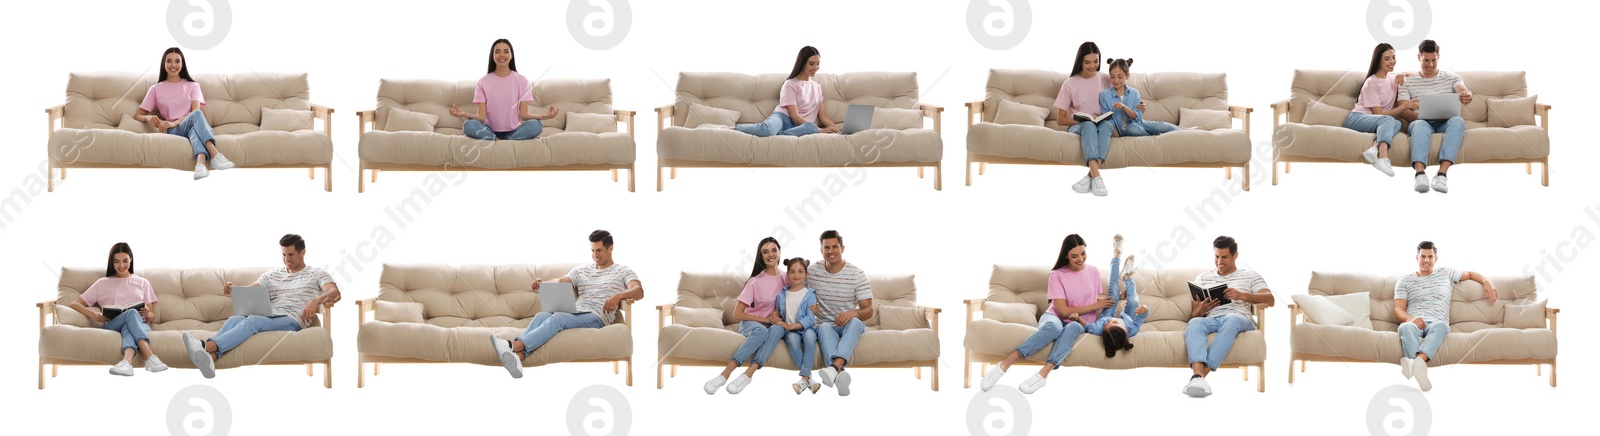 Image of Collage with photos of people sitting on stylish sofas against white background. Banner design